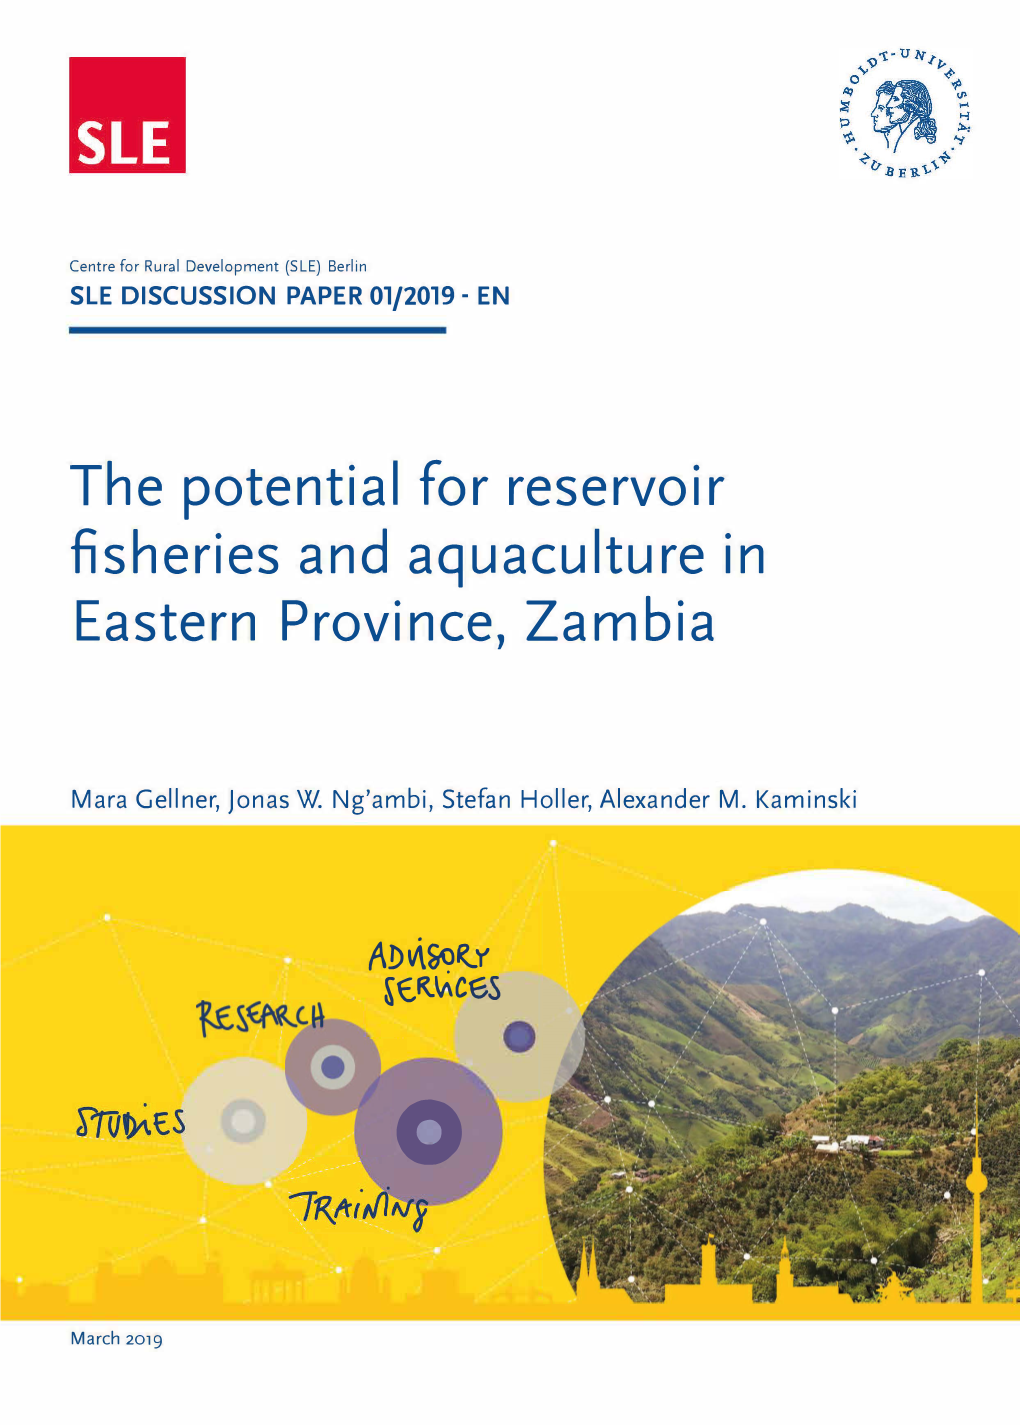 The Potential for Reservoir Fisheries and Aquaculture in Eastern Province, Zambia